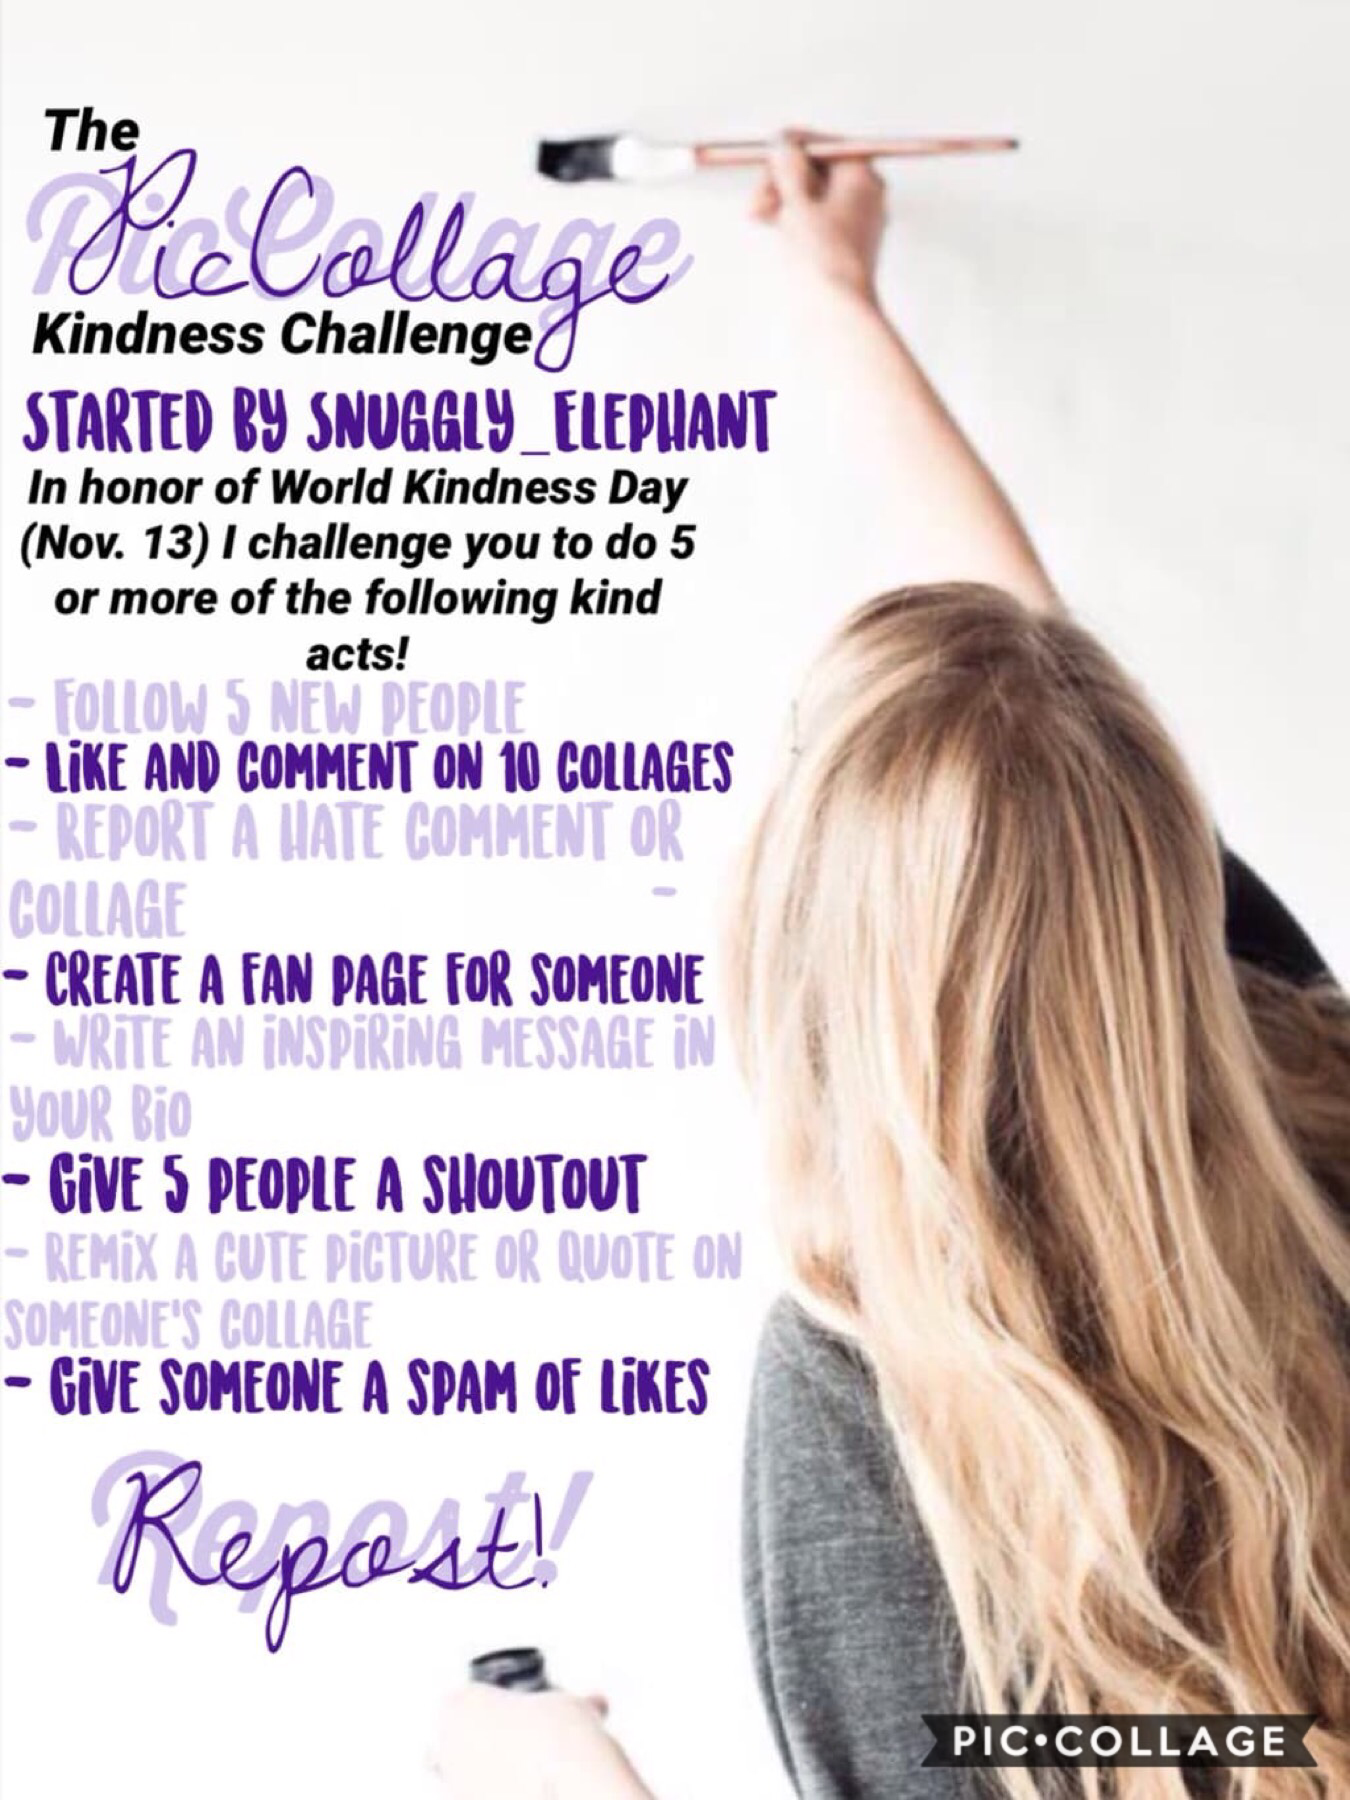 💞 Tap 💞
Reposted! Started by @snuggly_elephant (sorry if I got the username wrong)
This is honour of World Kindness Day! HAPPY WORLD KINDNESS DAY 🎉
Anyway, report this on your account. I'm gonna try and do as many of these as I can